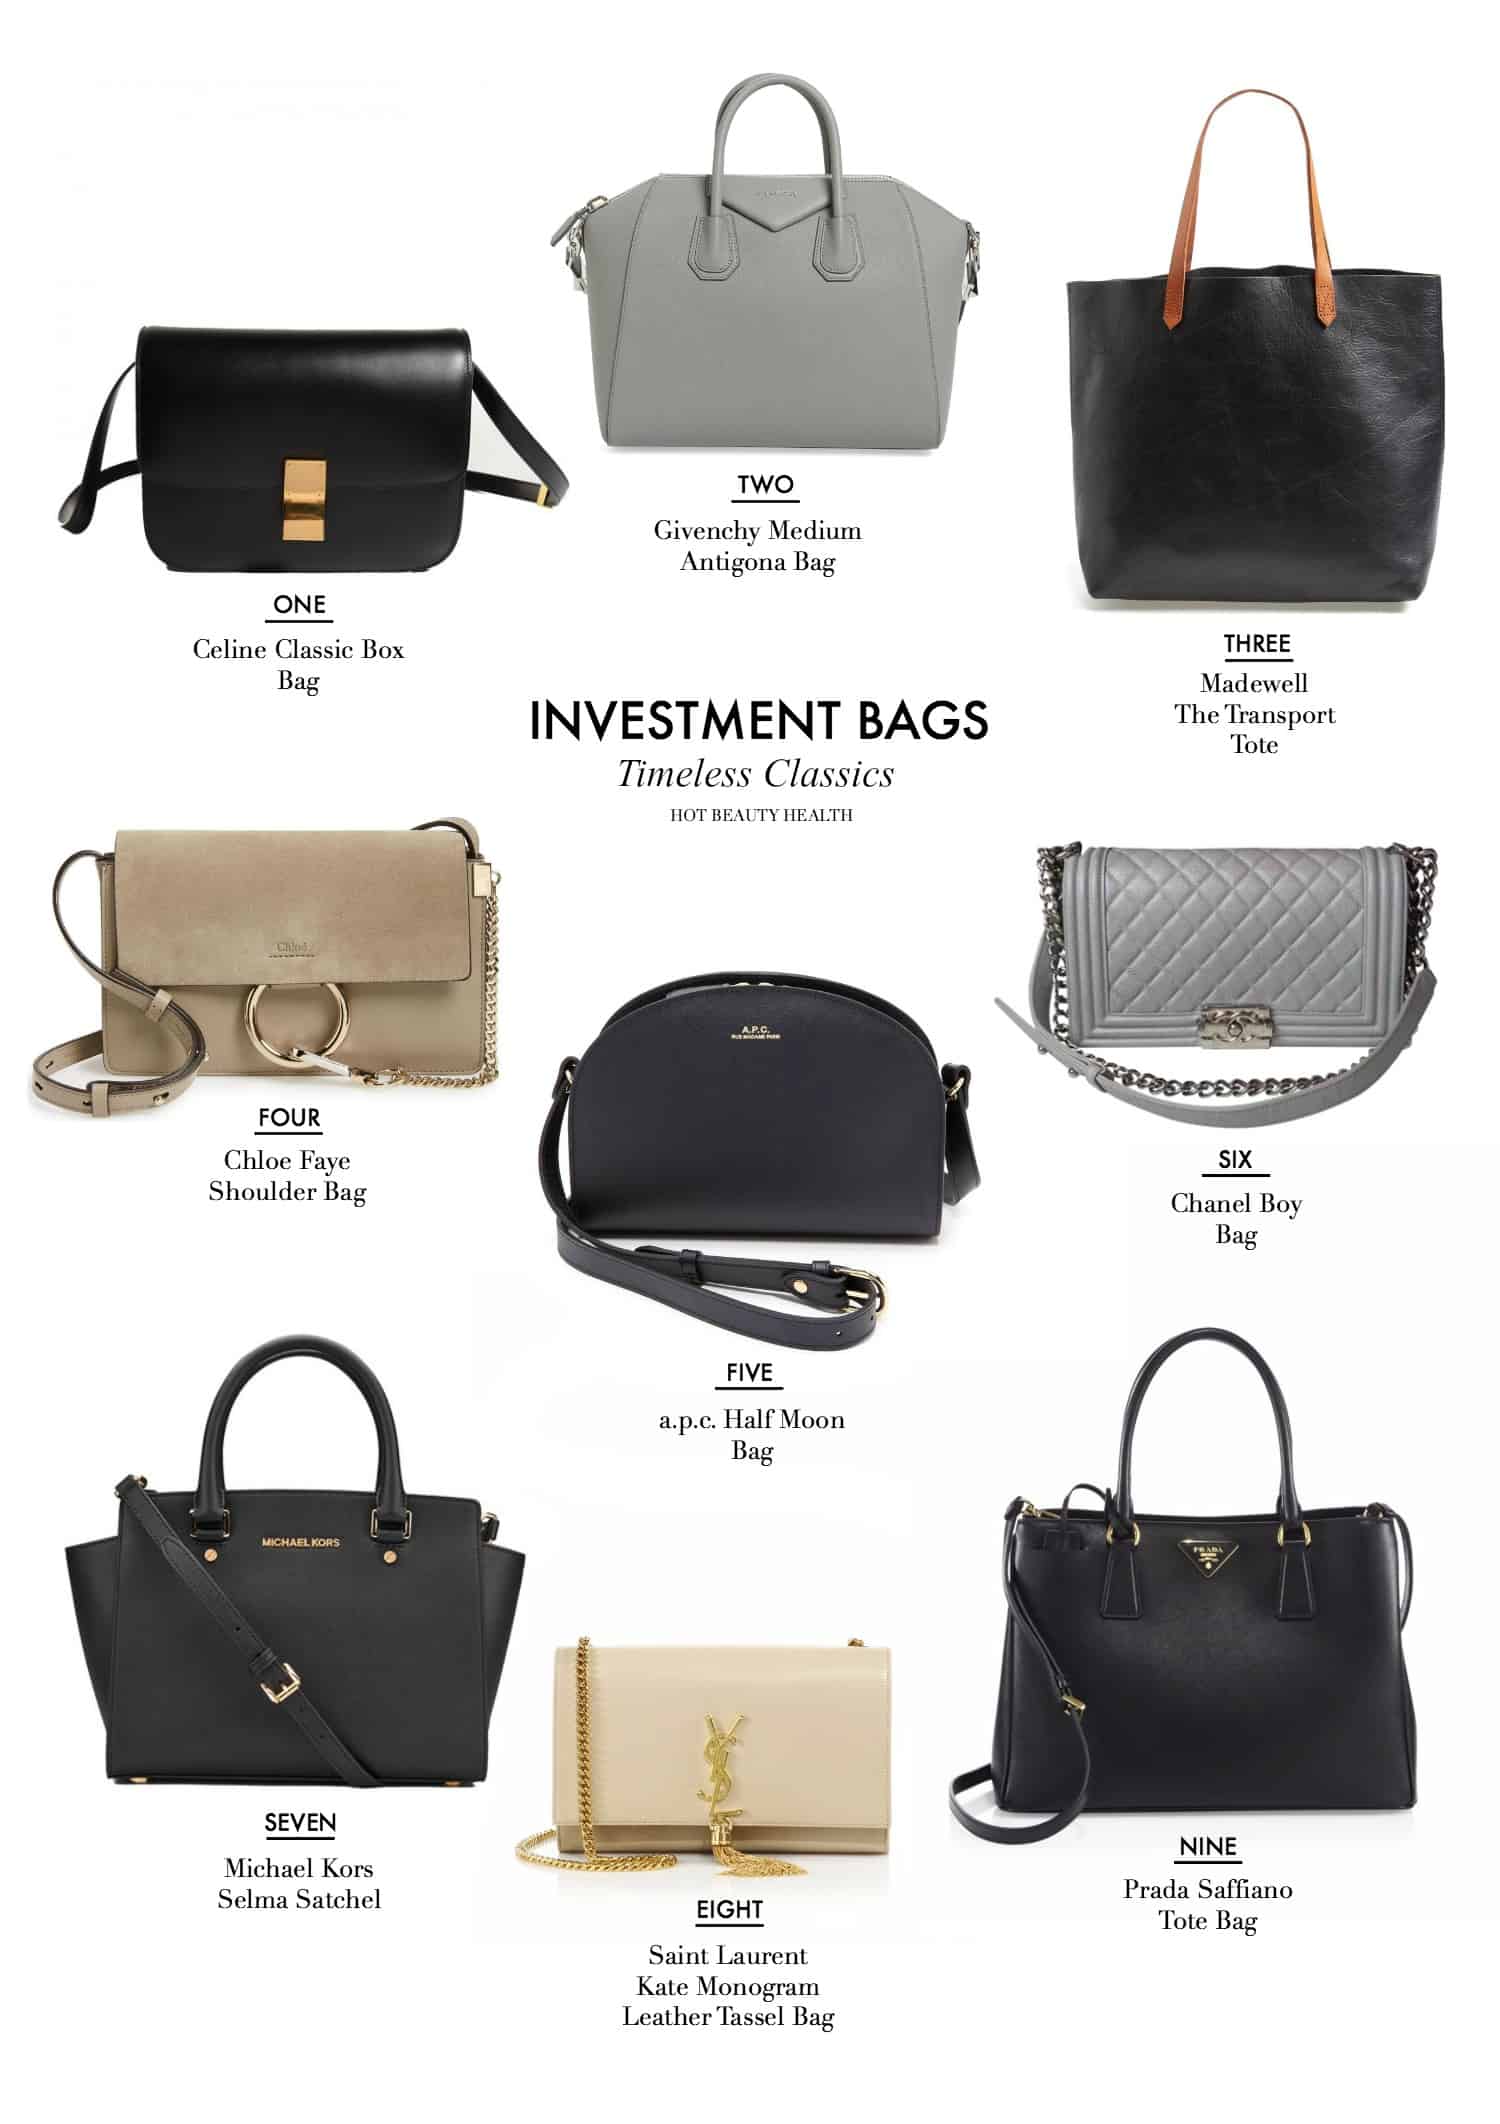 6 Prada Bags That Are Worth the Investment 